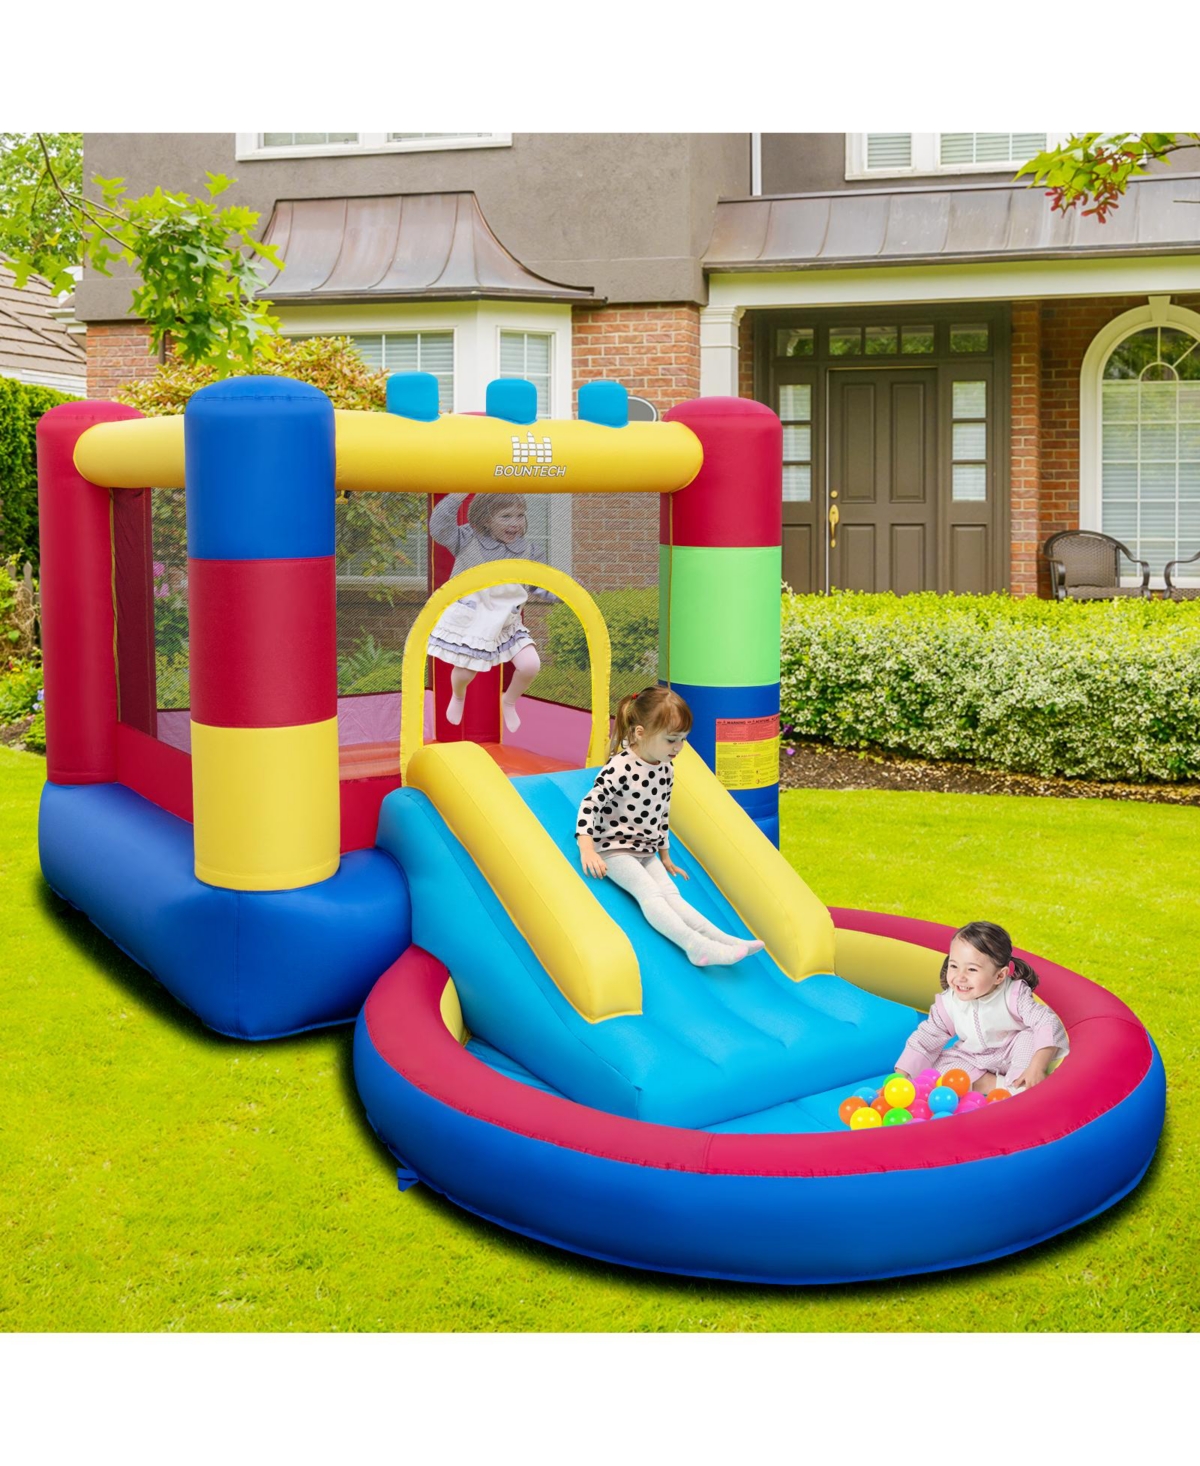 4-in-1 Jigsaw Theme Inflatable Bounce House with 480W Blower - Open Miscellaneous